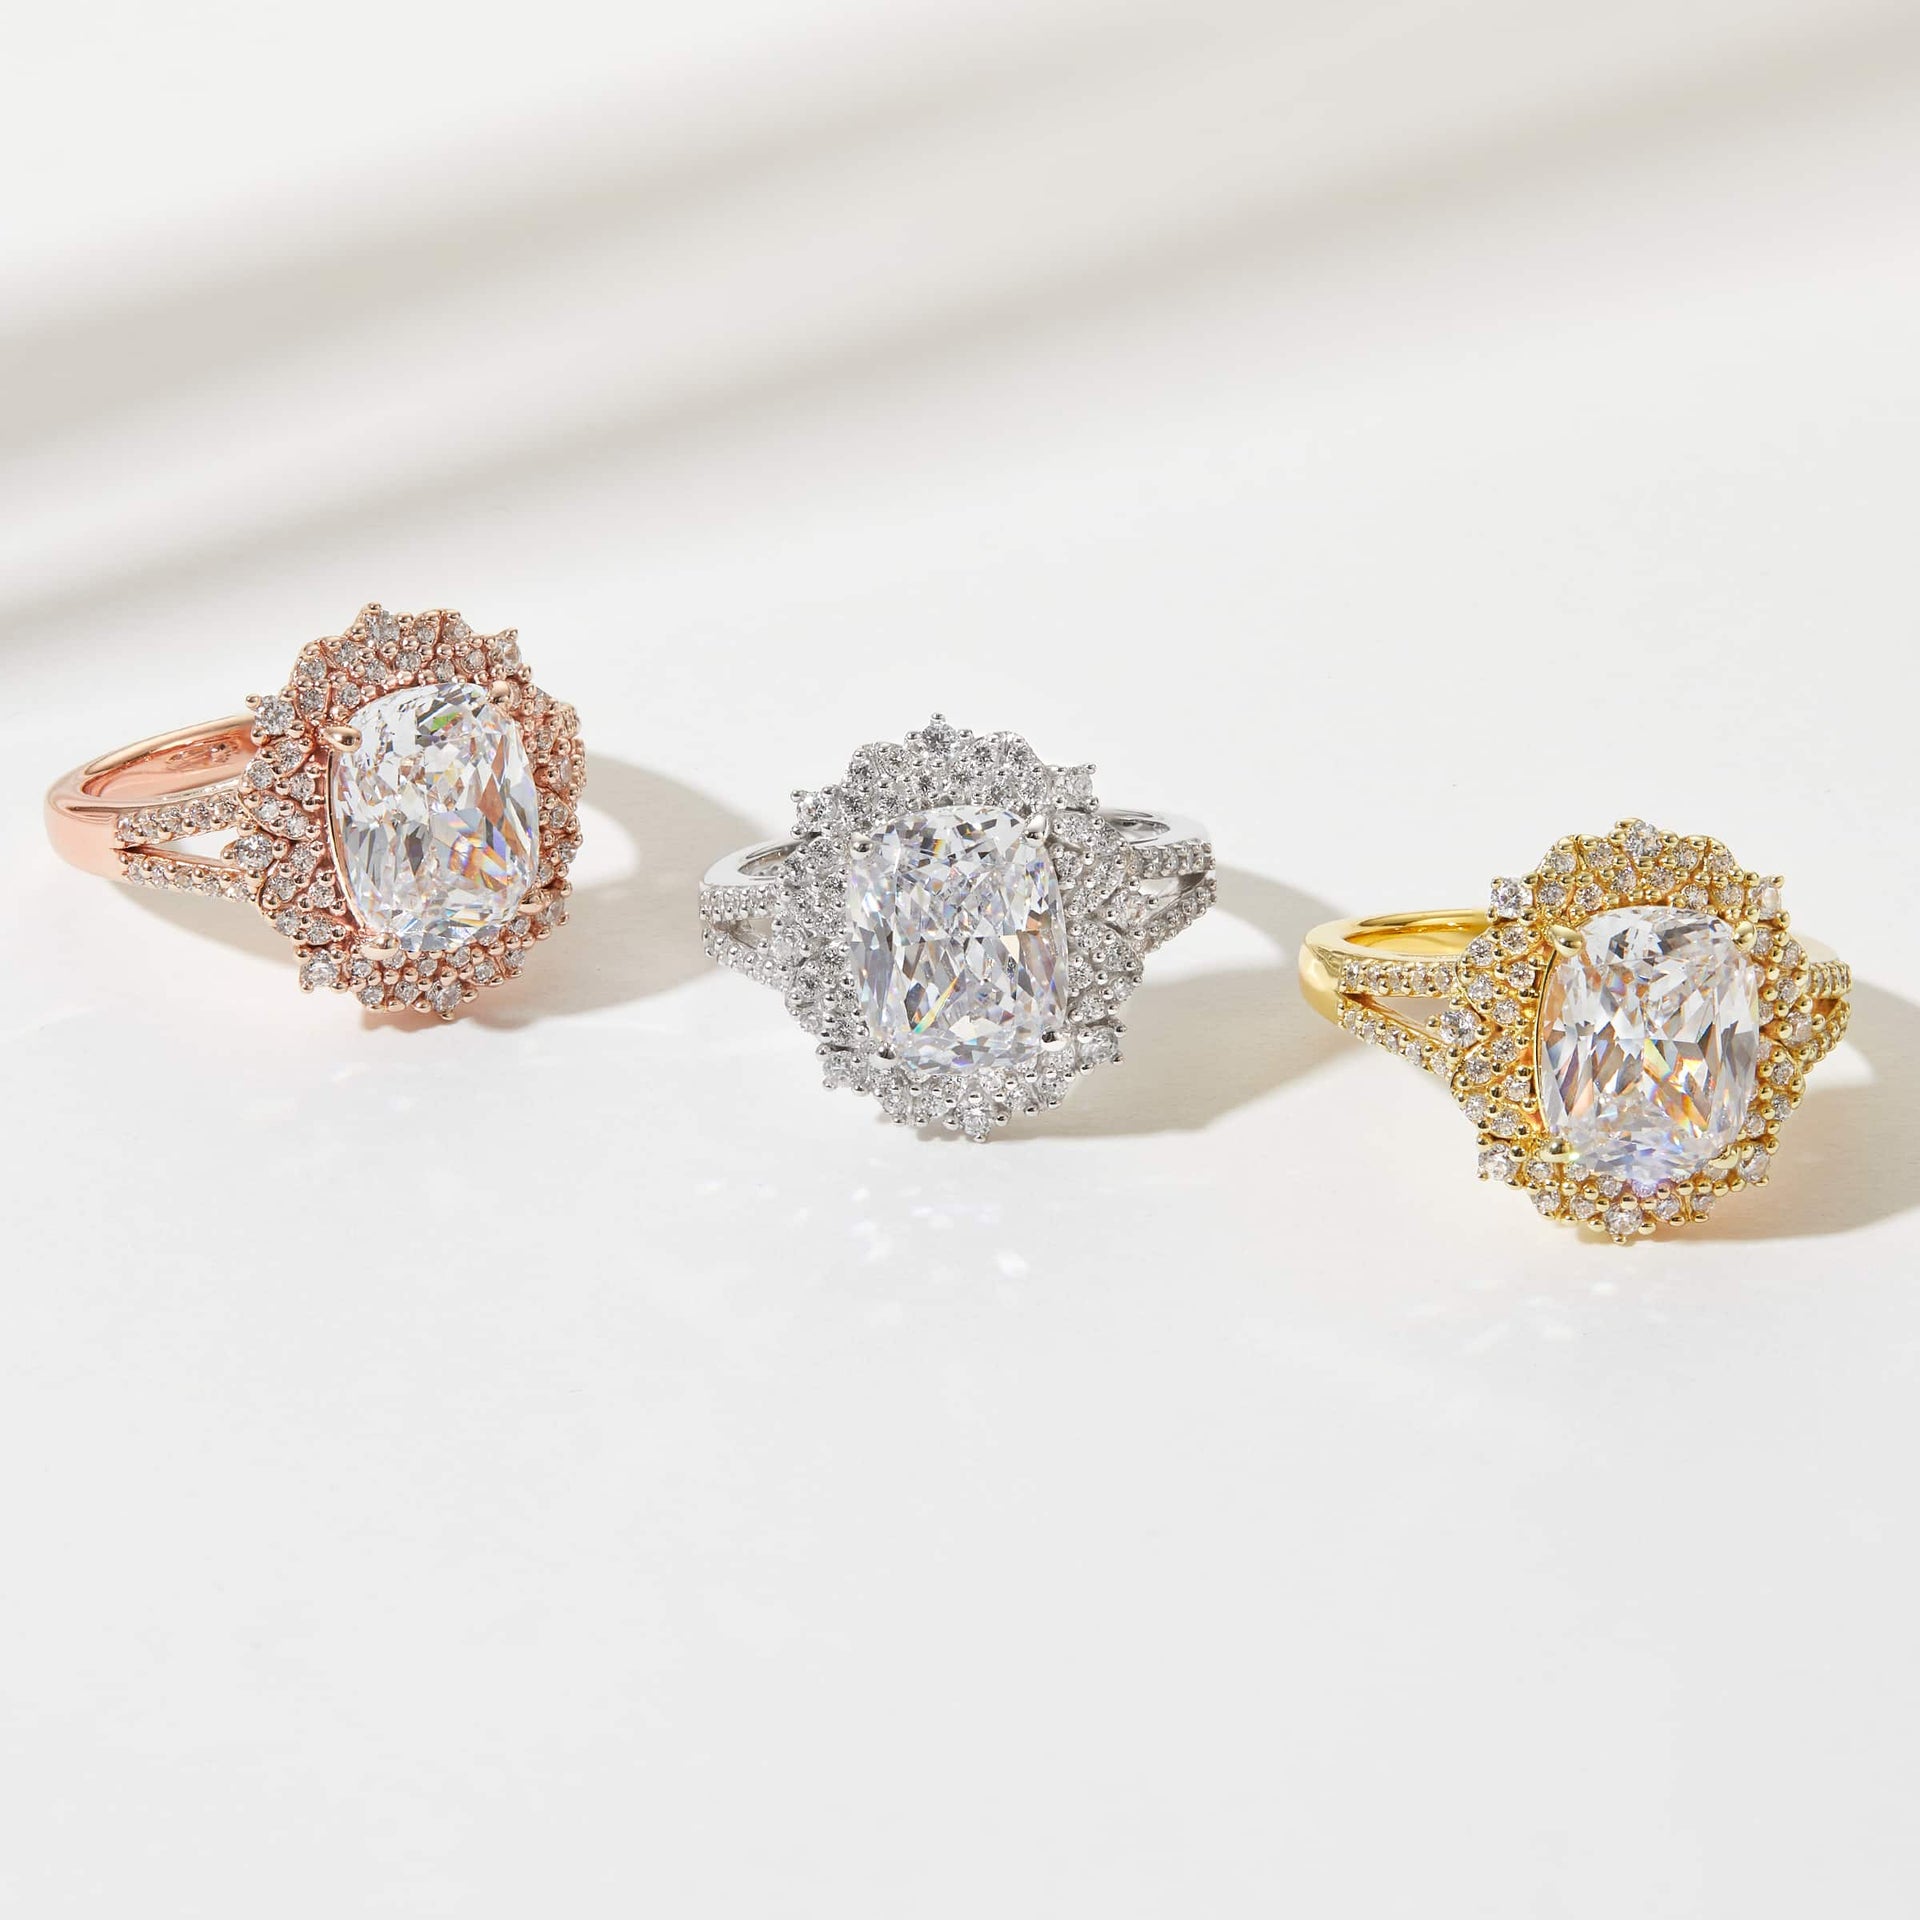 the sol engagement ring shown in rose gold, silver, and gold on a neutral background with light beams